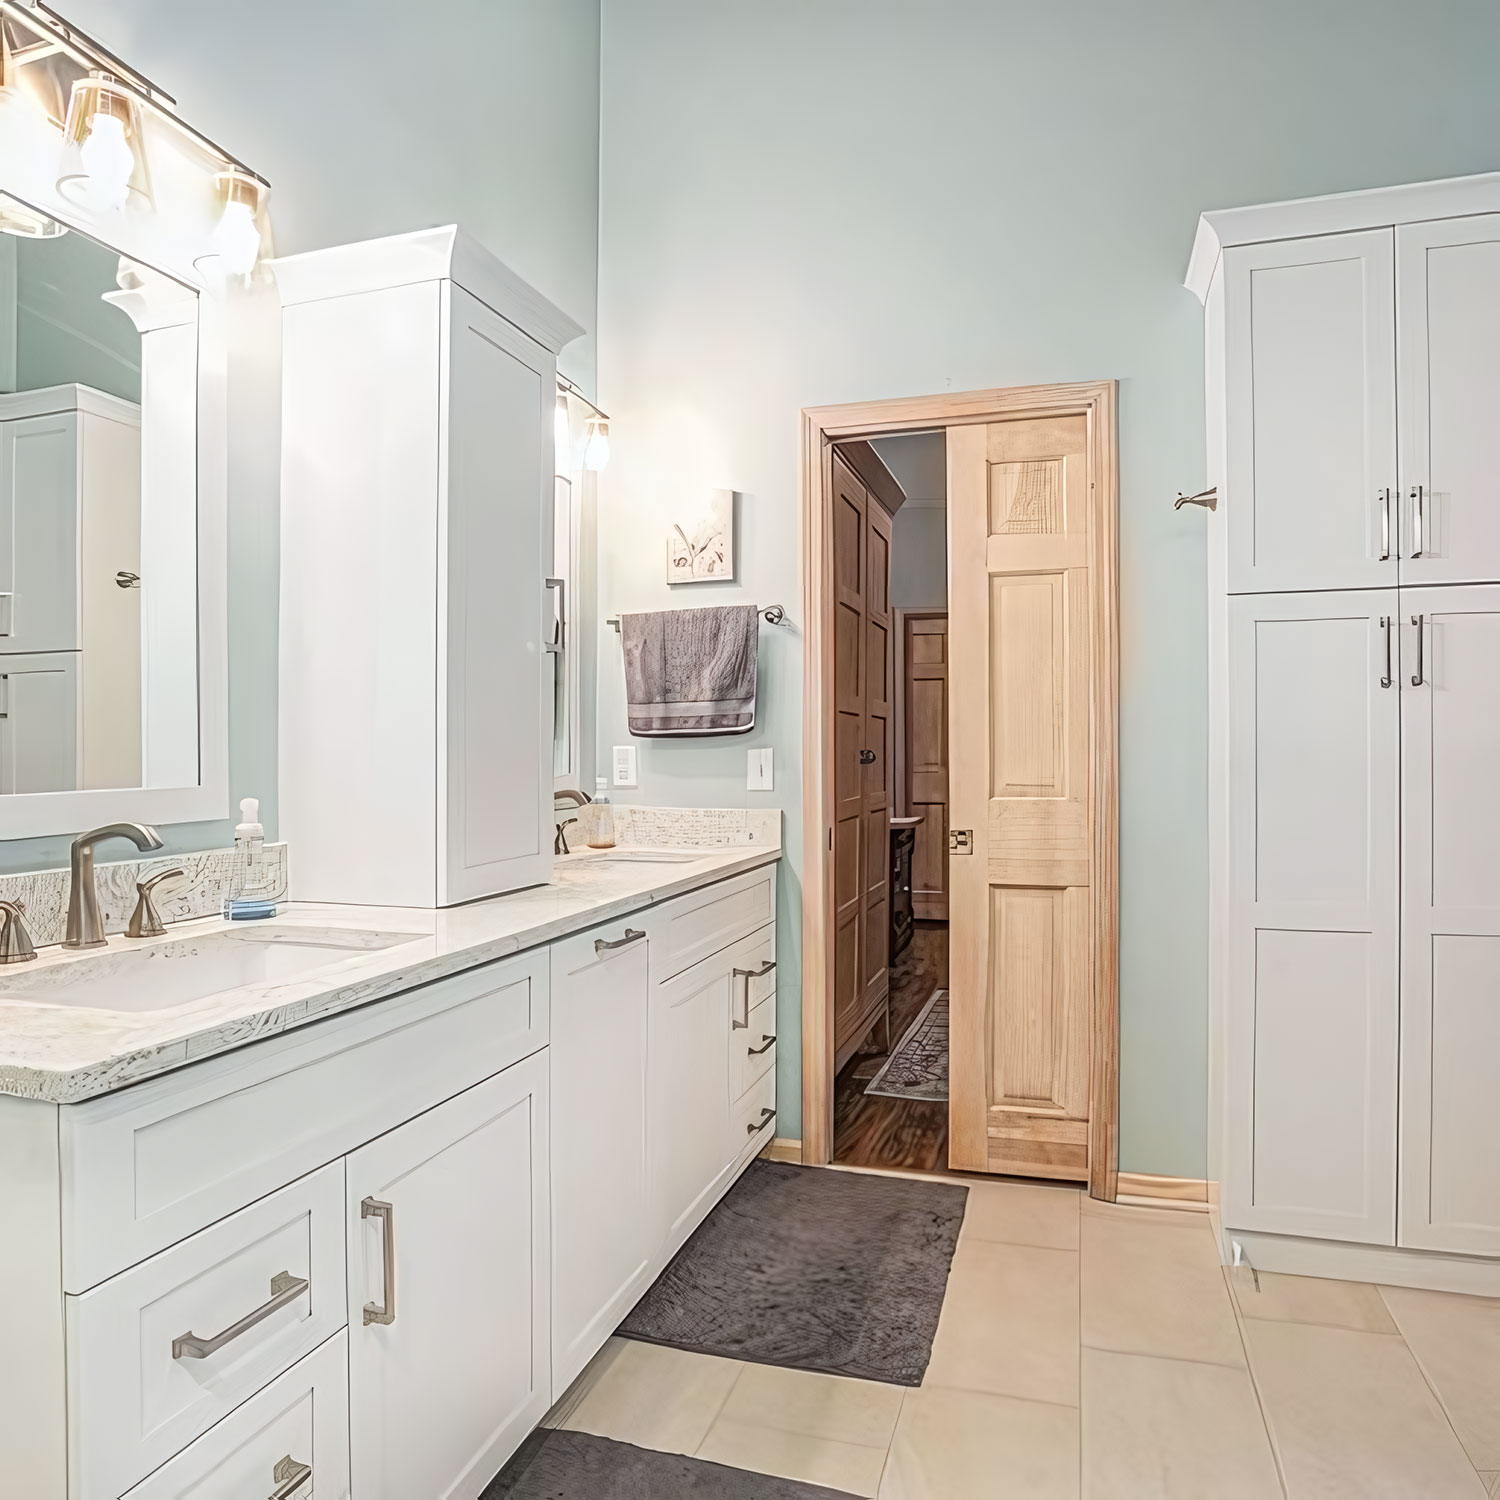 New Bathroom Design and Entrance showing dual vanities and tall storage cabinet